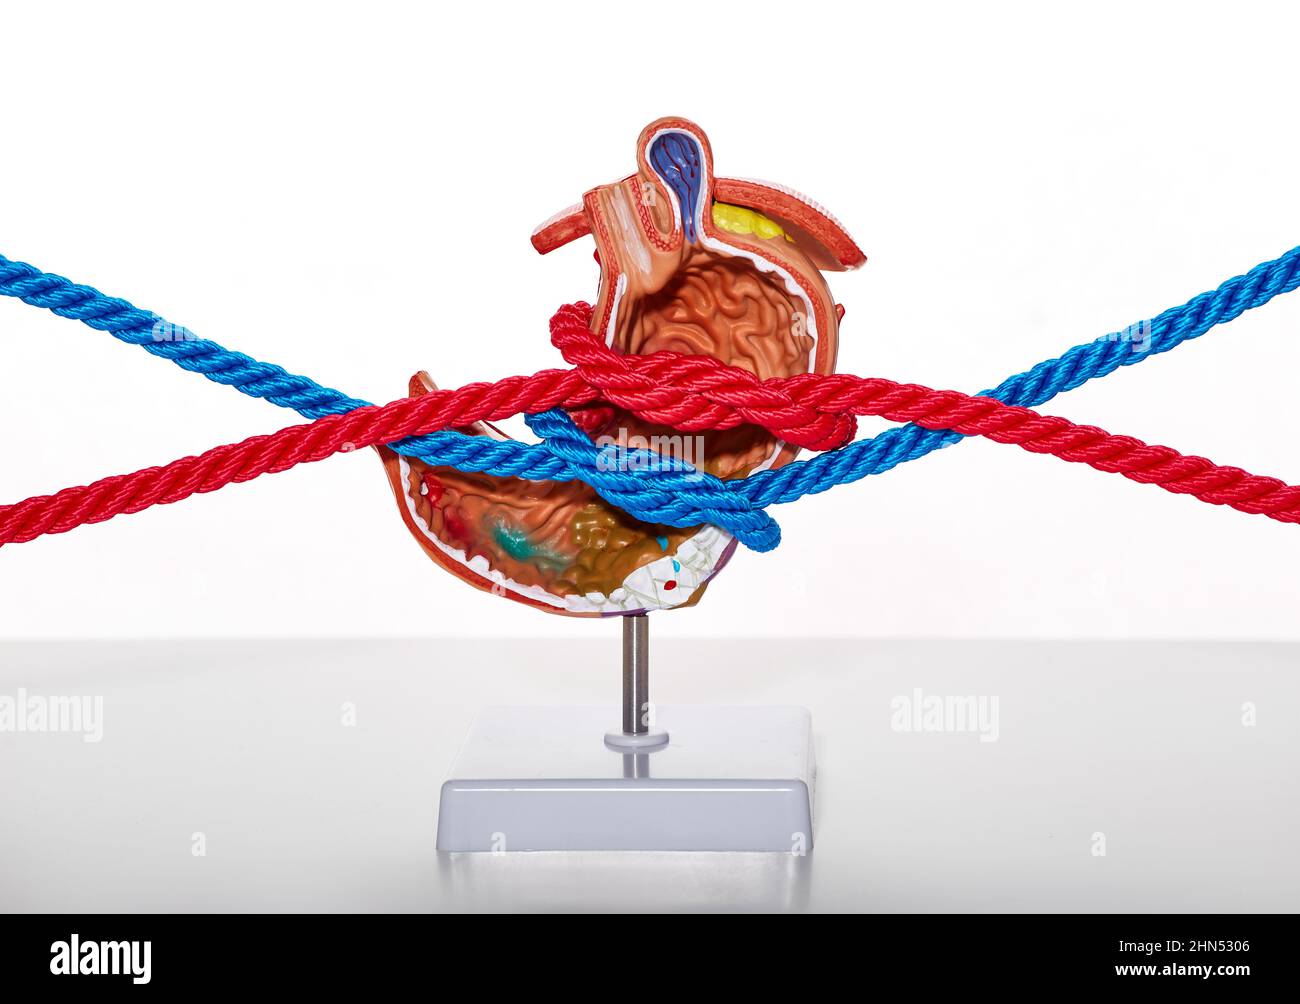 Problems and diseases of human stomach, tight stomach. Anatomical model of stomach tied with ropes simulating stomach compression and tight sensation Stock Photo